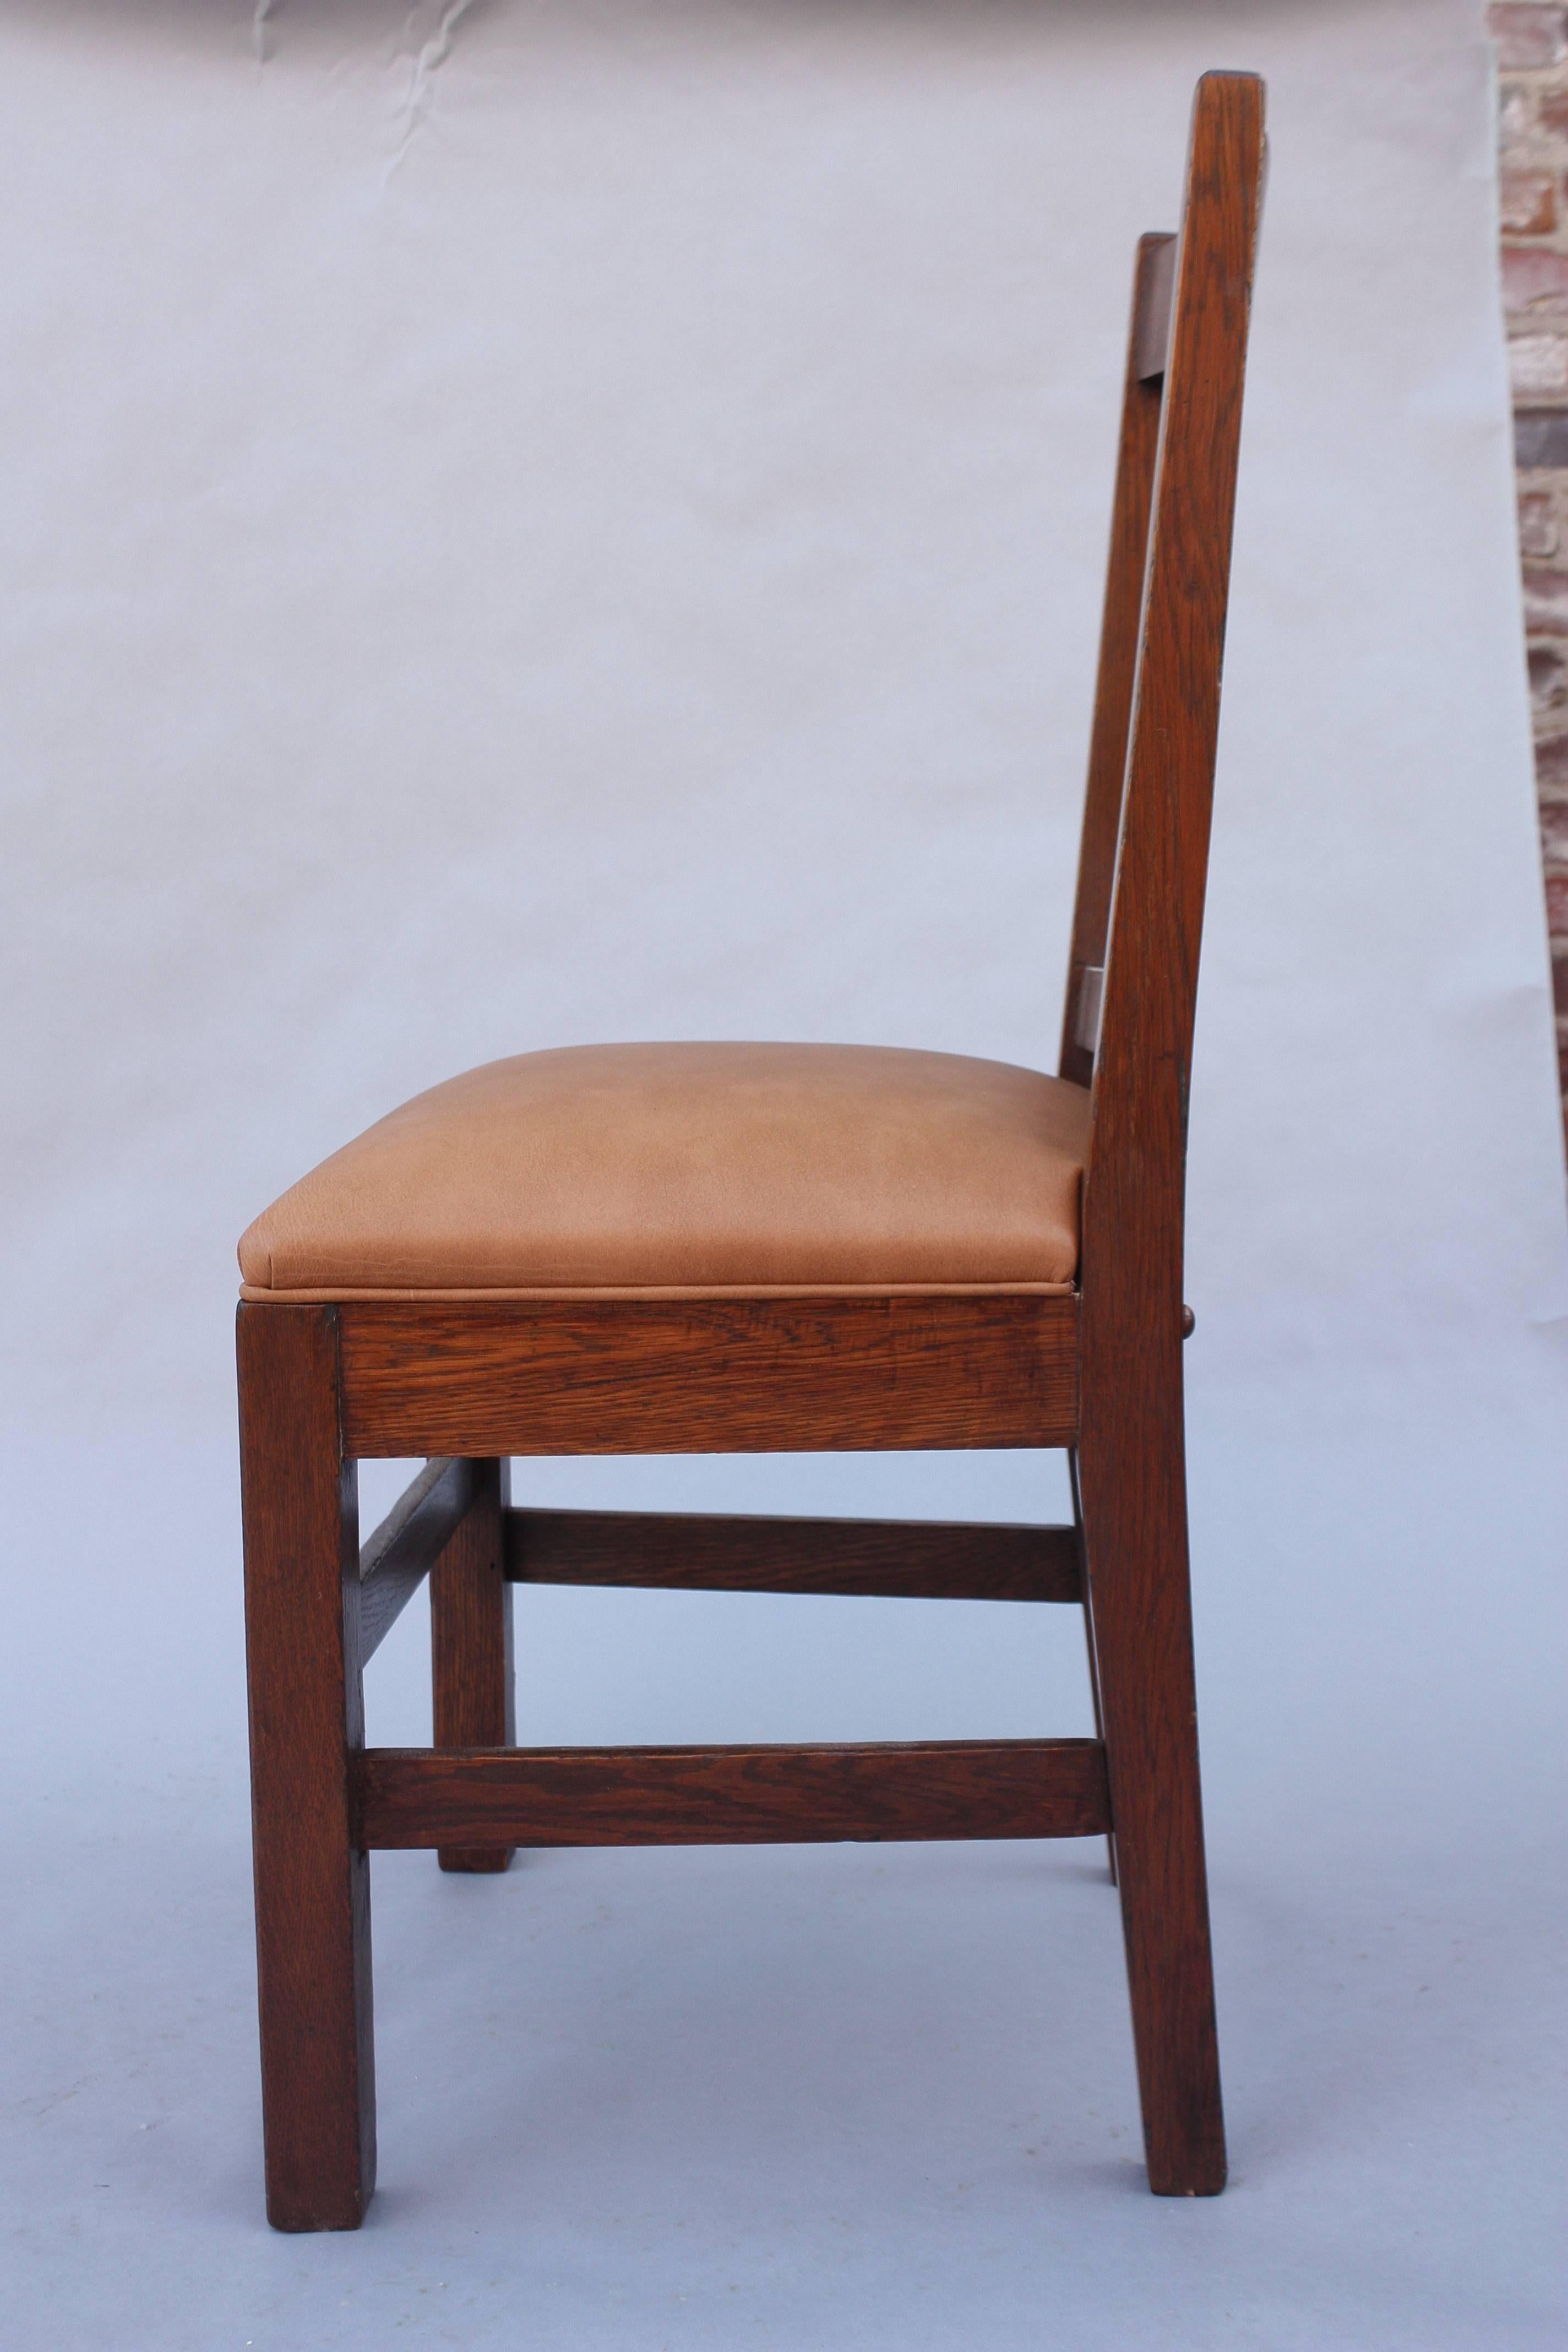 Craftsman period oak side chair with new leather upholstery.